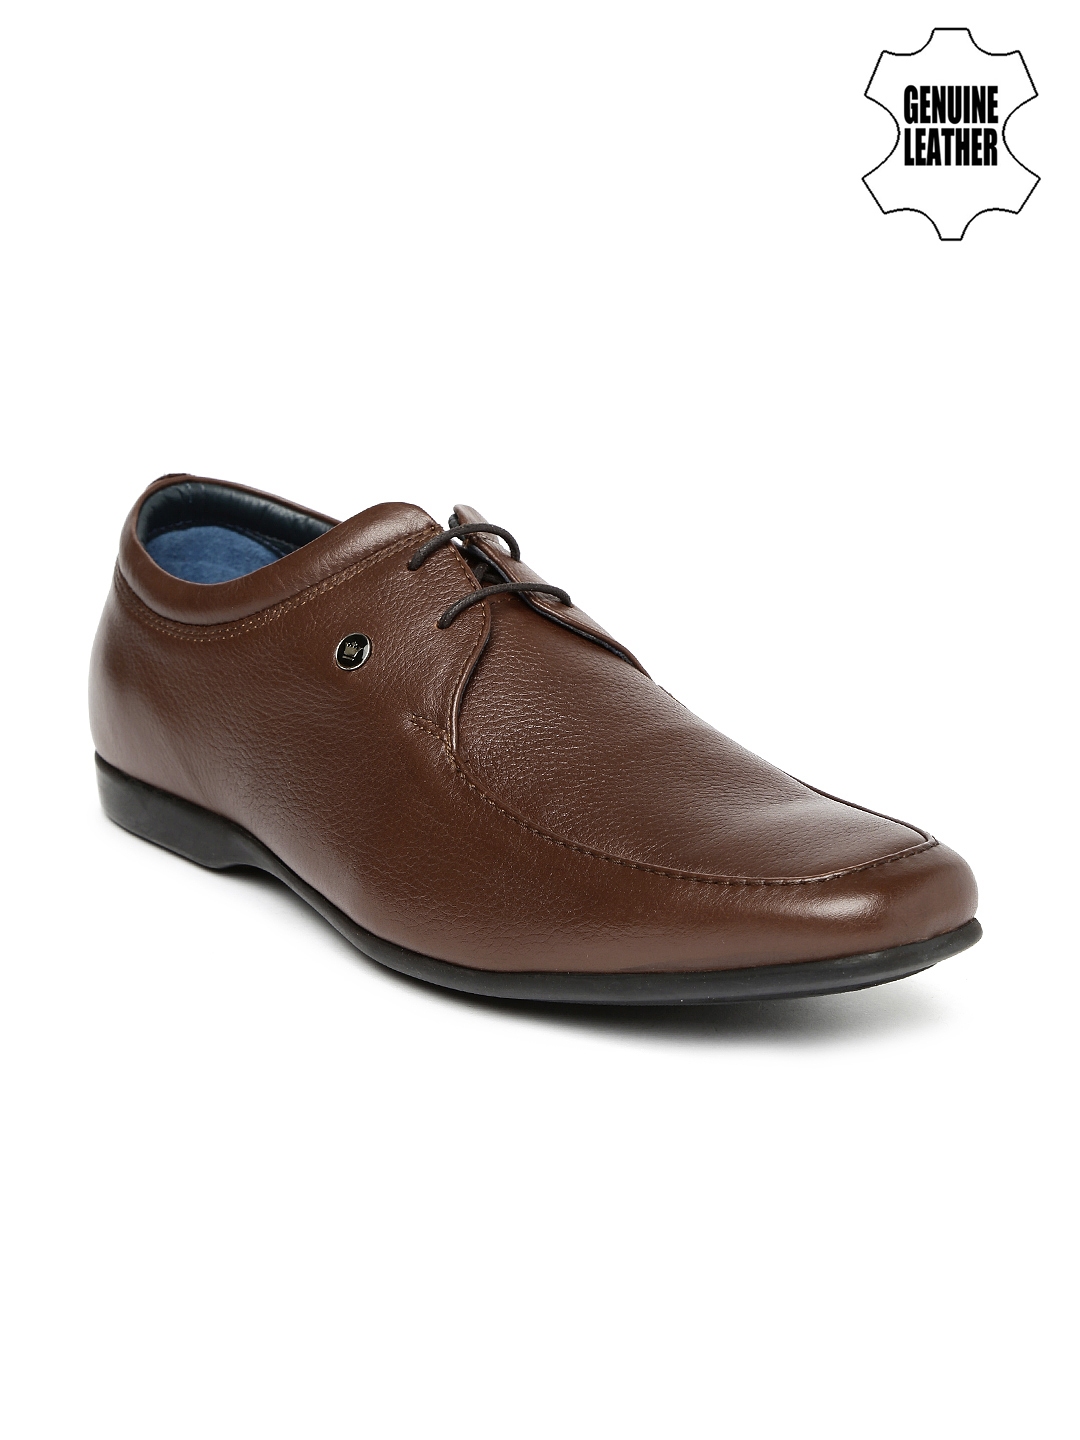 louis philippe men's derby leather formal shoes